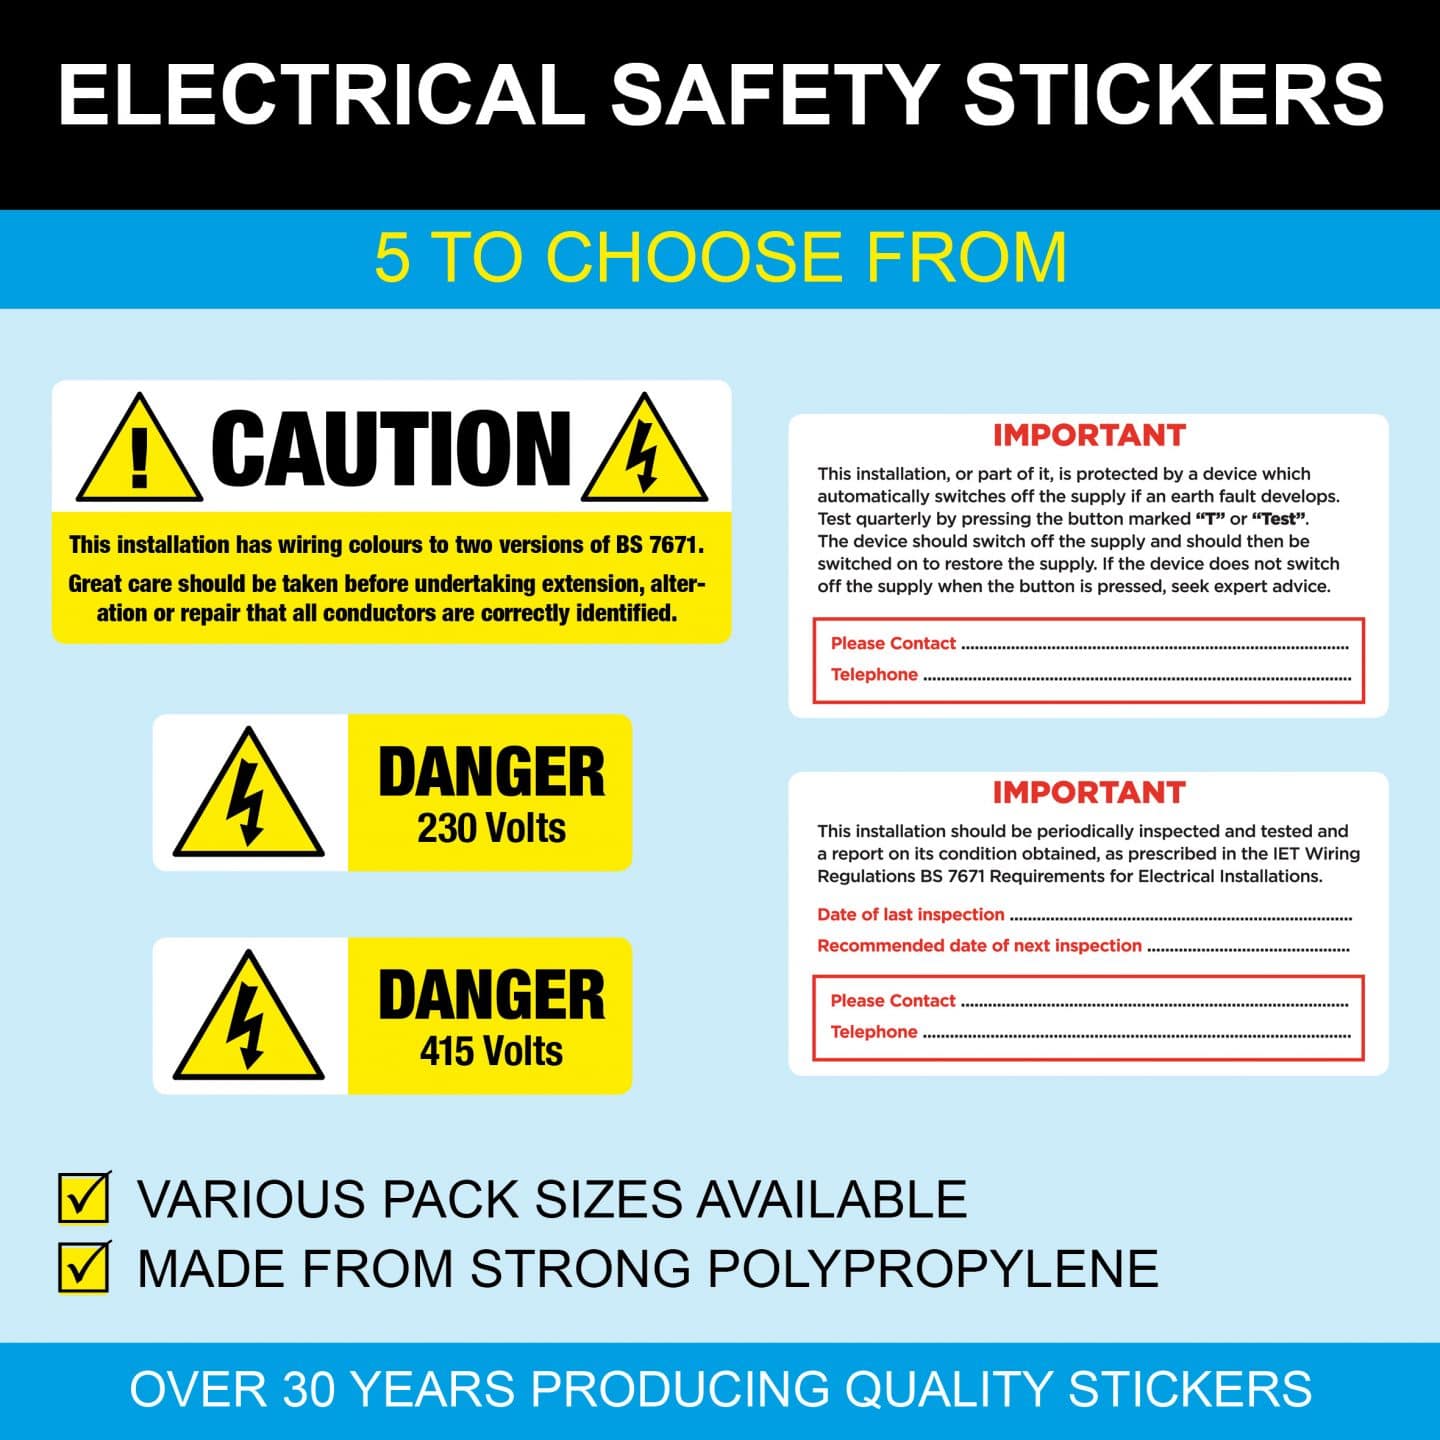 A6-150x100mm 7 Year High Quality Vinyl 230 Volts Electrical Safety Sticker 